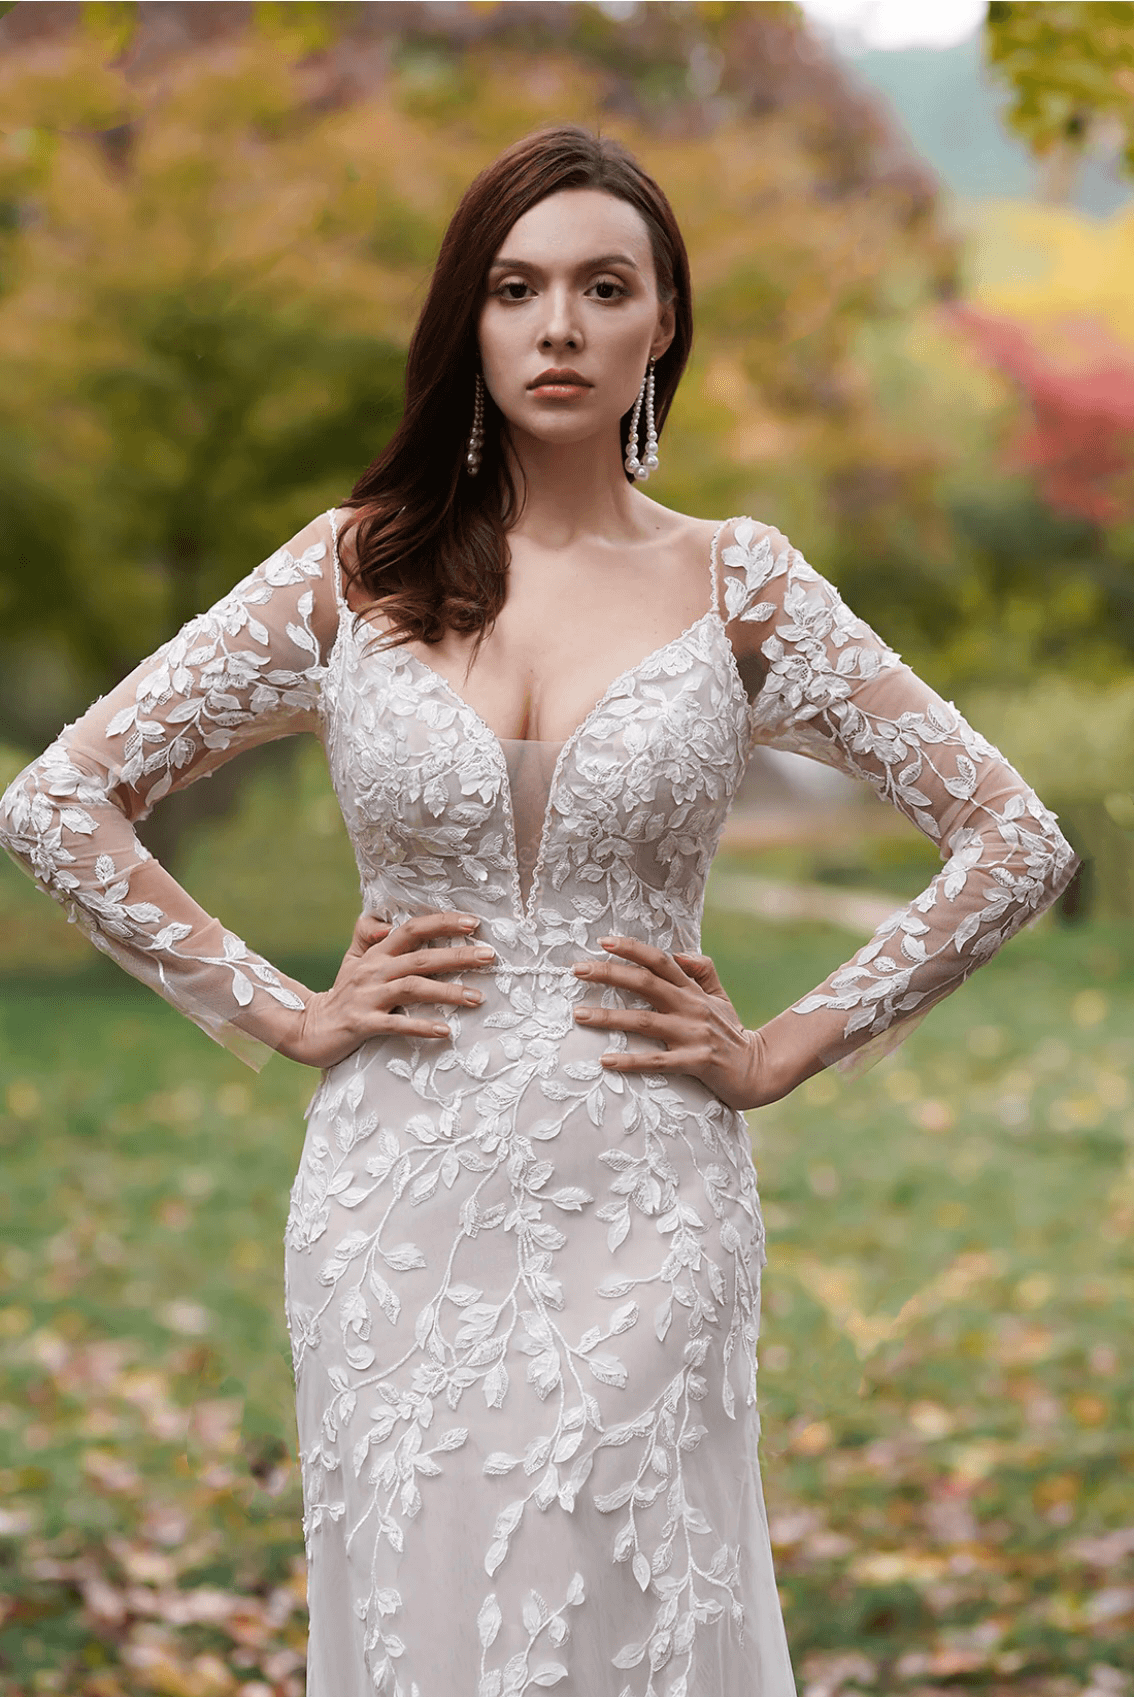 Delicate 3D Lace Embroidery Hand Beaded Straps Gown With V-Neck Sleeves - Plus Size - WonderlandByLilian